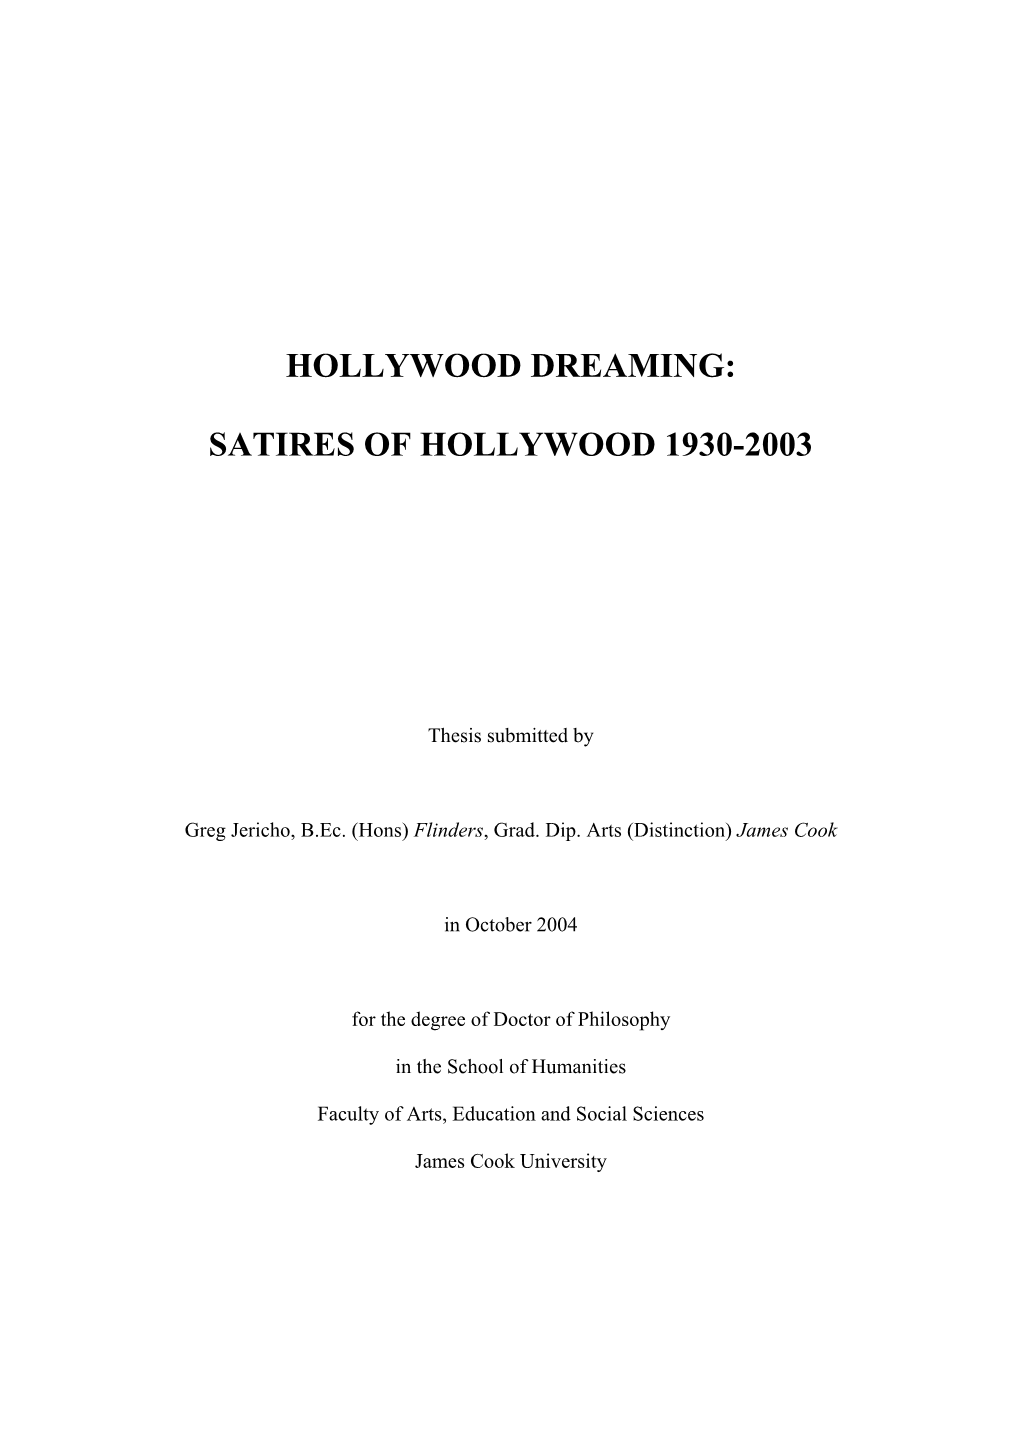 Hollywood Dreaming: Satires of Hollywood 1930-2003